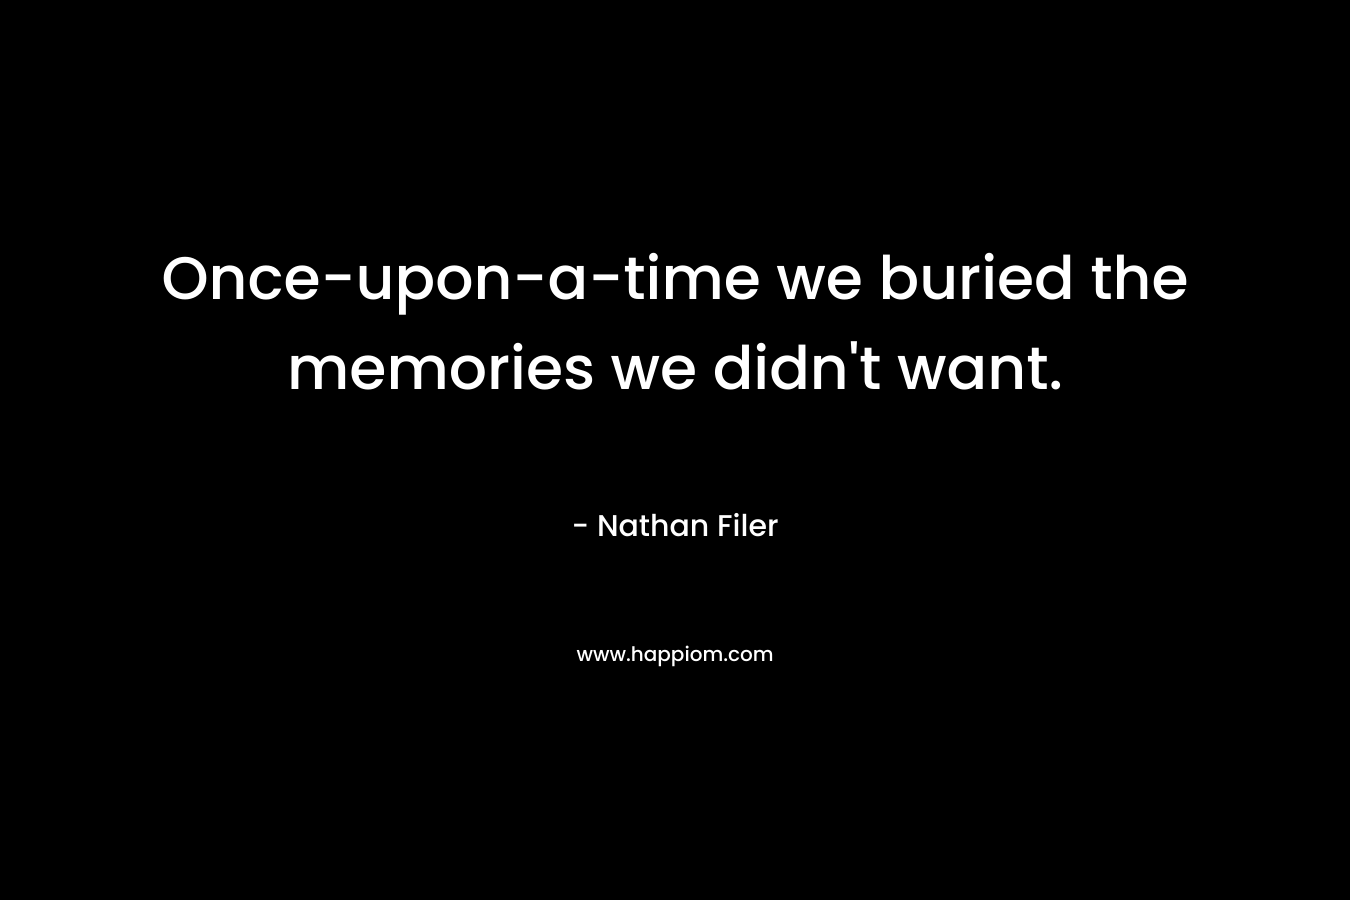 Once-upon-a-time we buried the memories we didn’t want. – Nathan Filer